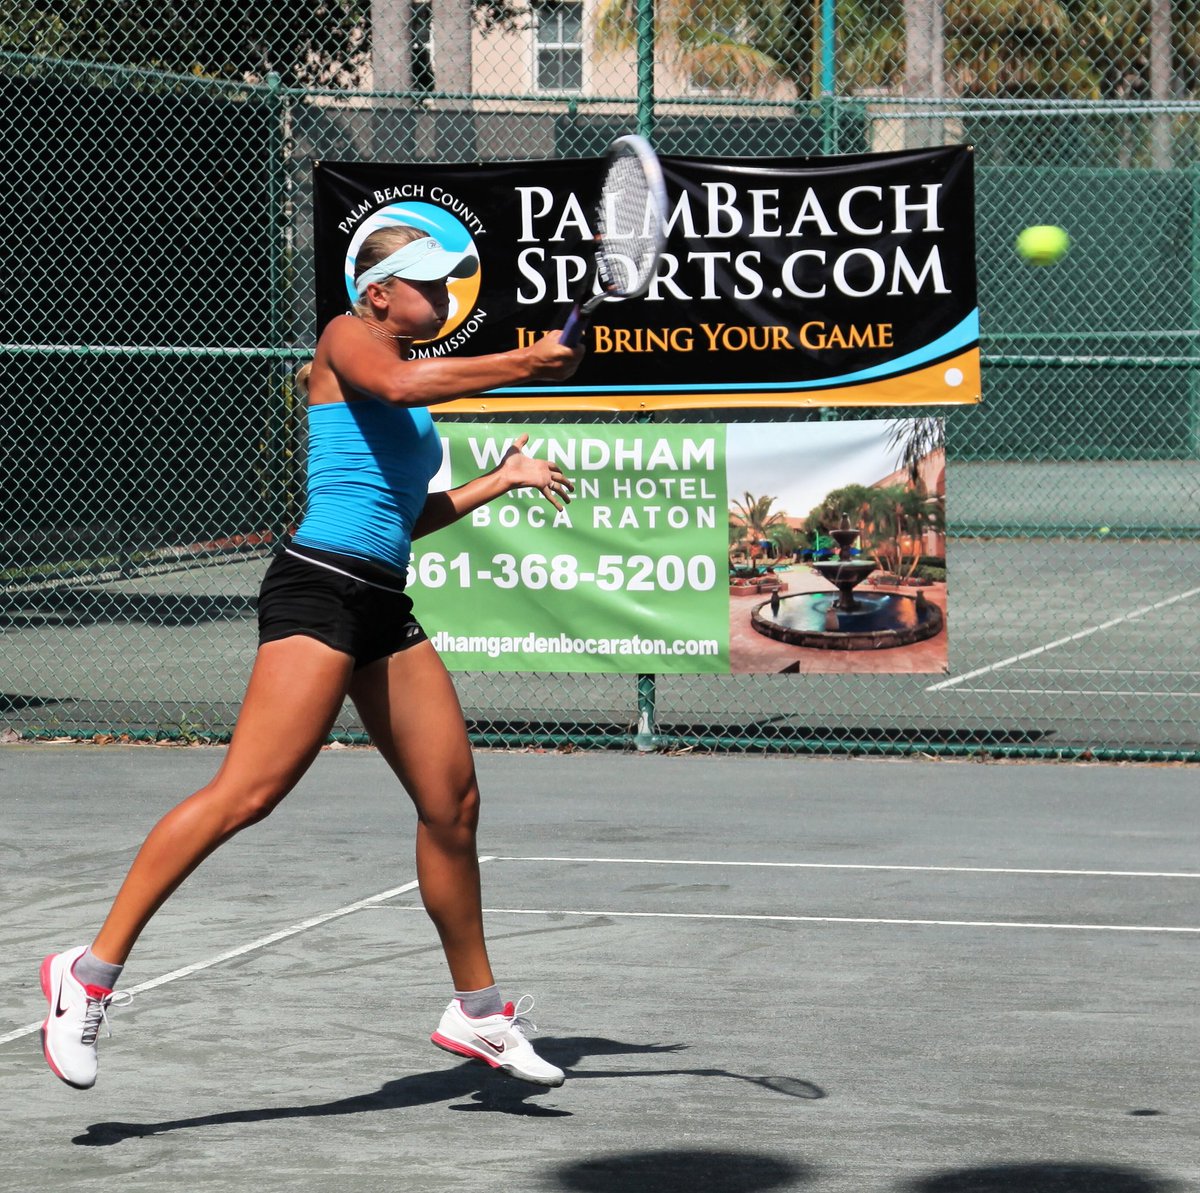 The Delray Beach ITF Championships begin tomorrow! 🎾 Held at the Delray Beach Swim and Tennis Center, the event will consist of the Boys and Girls 18 & under division with national and international competitors in the sport of tennis.